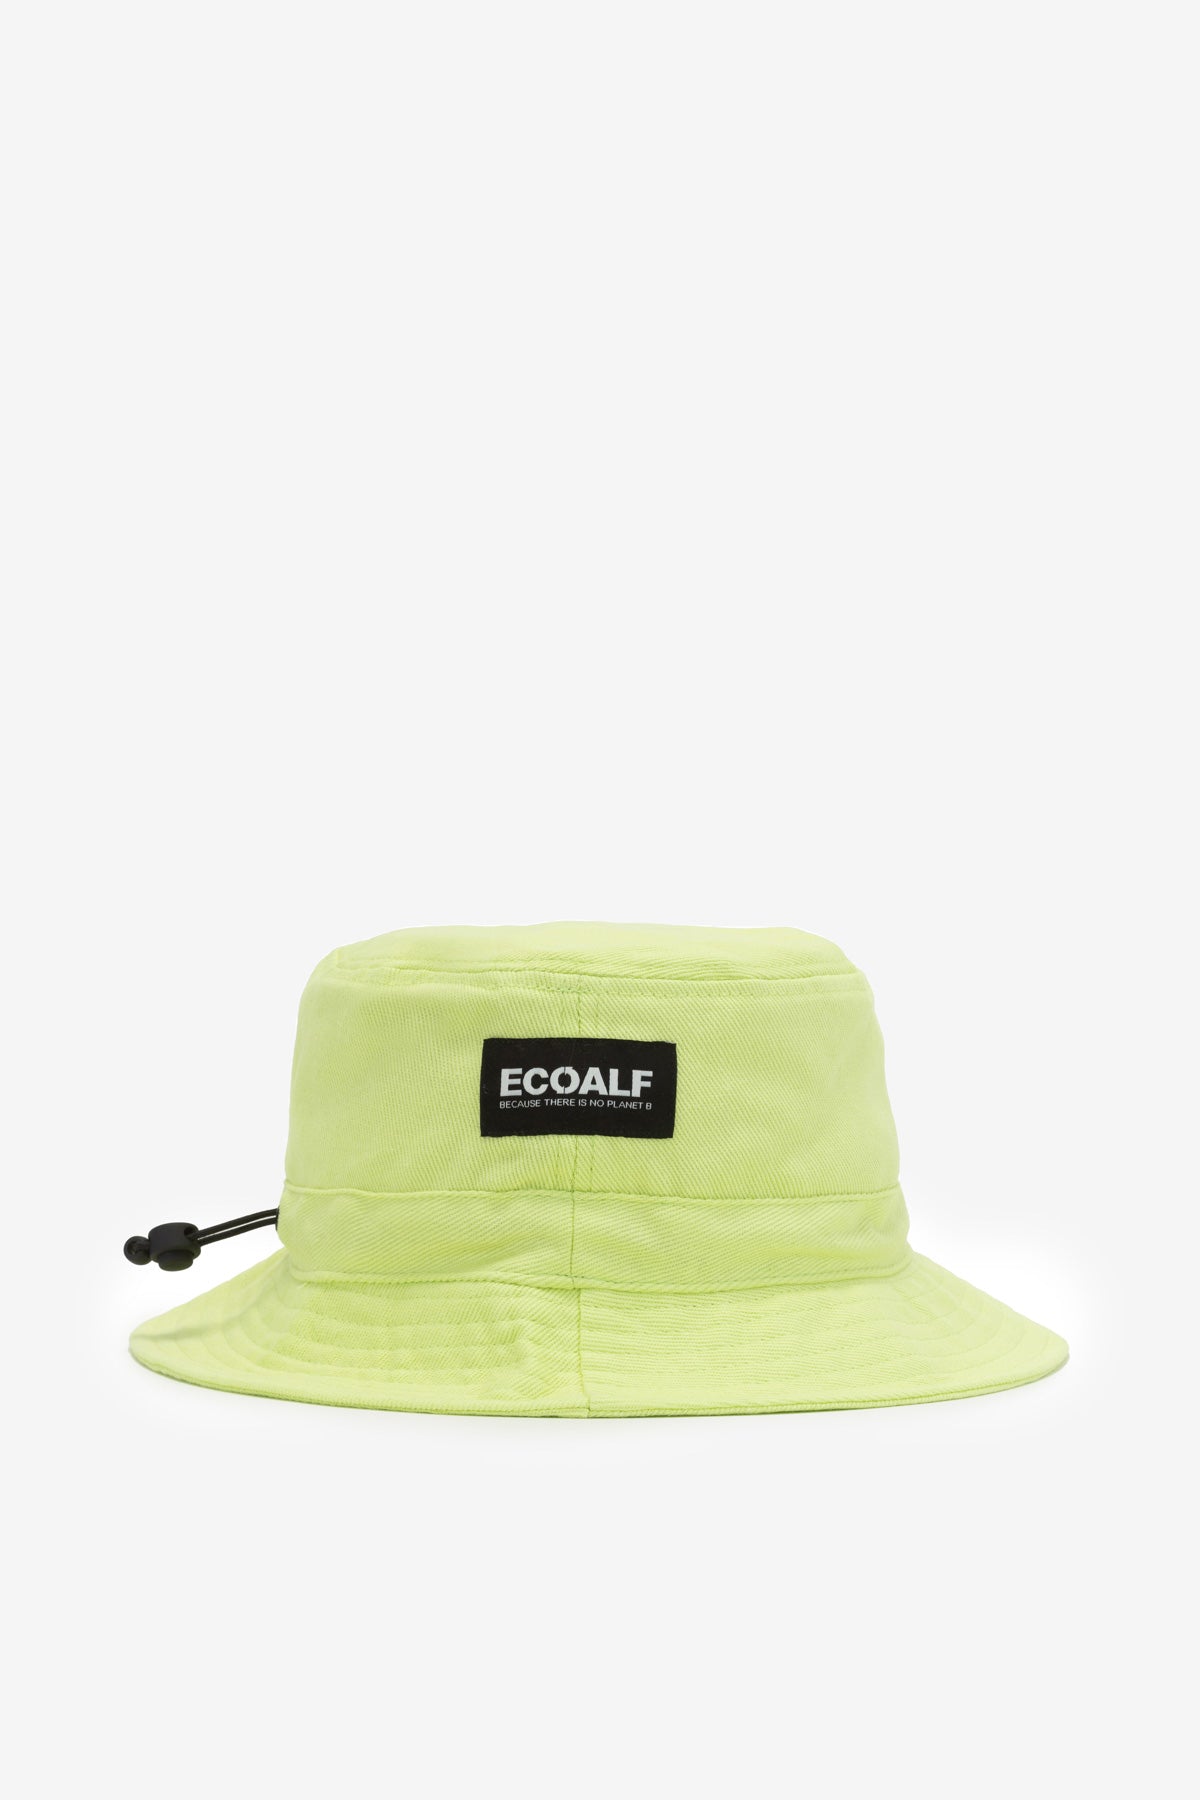 LIME GREEN FISHER BAS HAT